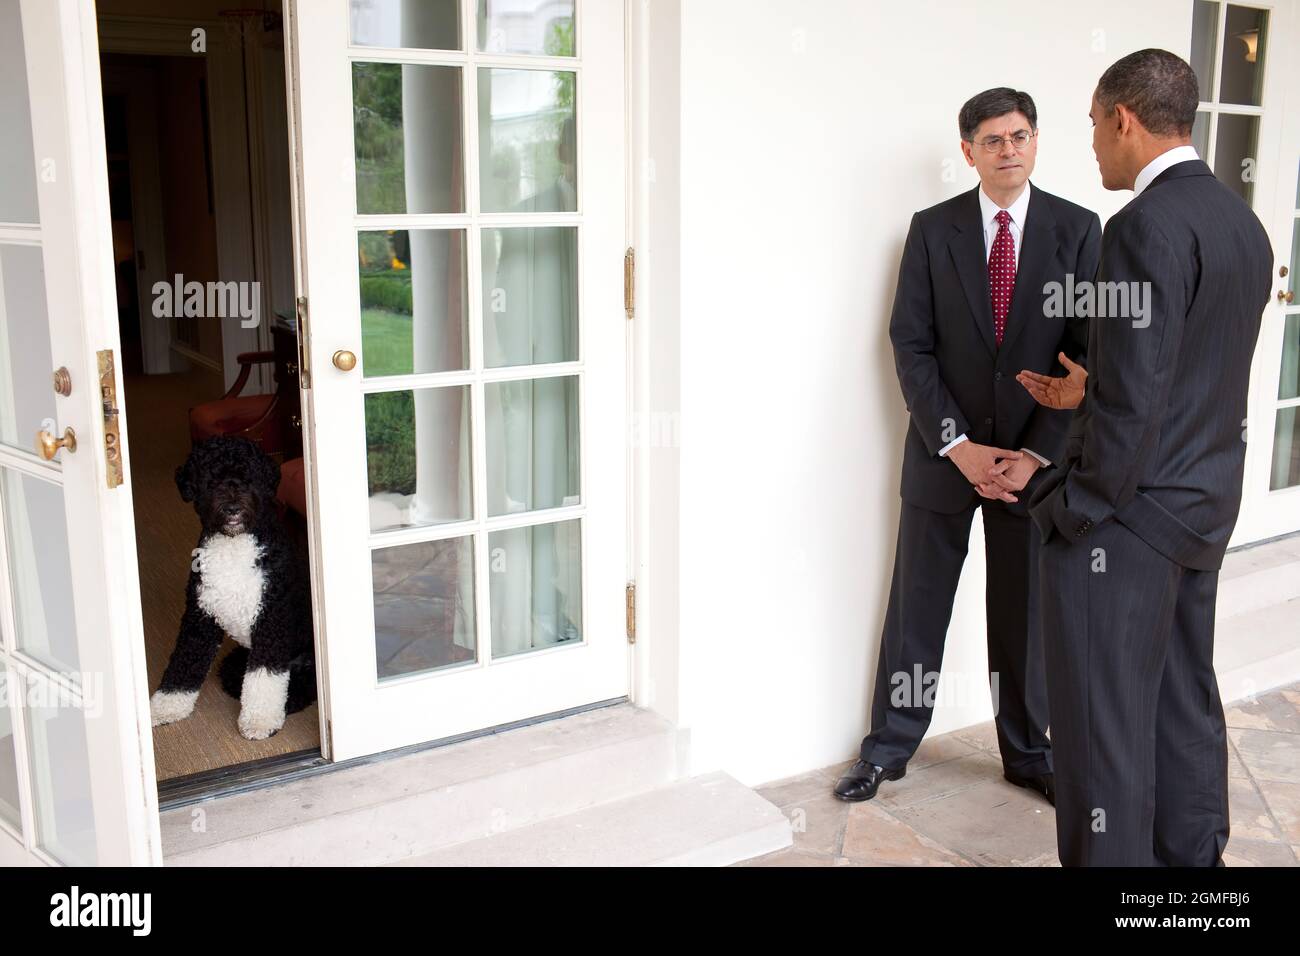 President Barack Obama talks with Jack Lew on the Colonnade of the White House, after he announced Lew’s nomination to replace Peter Orszag as director of the Office of Management and Budget, July 13, 2010. At left, Bo, the Obama family dog, waits for the President inside the doorway of the Outer Oval Office. (Official White House Photo by Pete Souza) This official White House photograph is being made available only for publication by news organizations and/or for personal use printing by the subject(s) of the photograph. The photograph may not be manipulated in any way and may not be used in Stock Photo